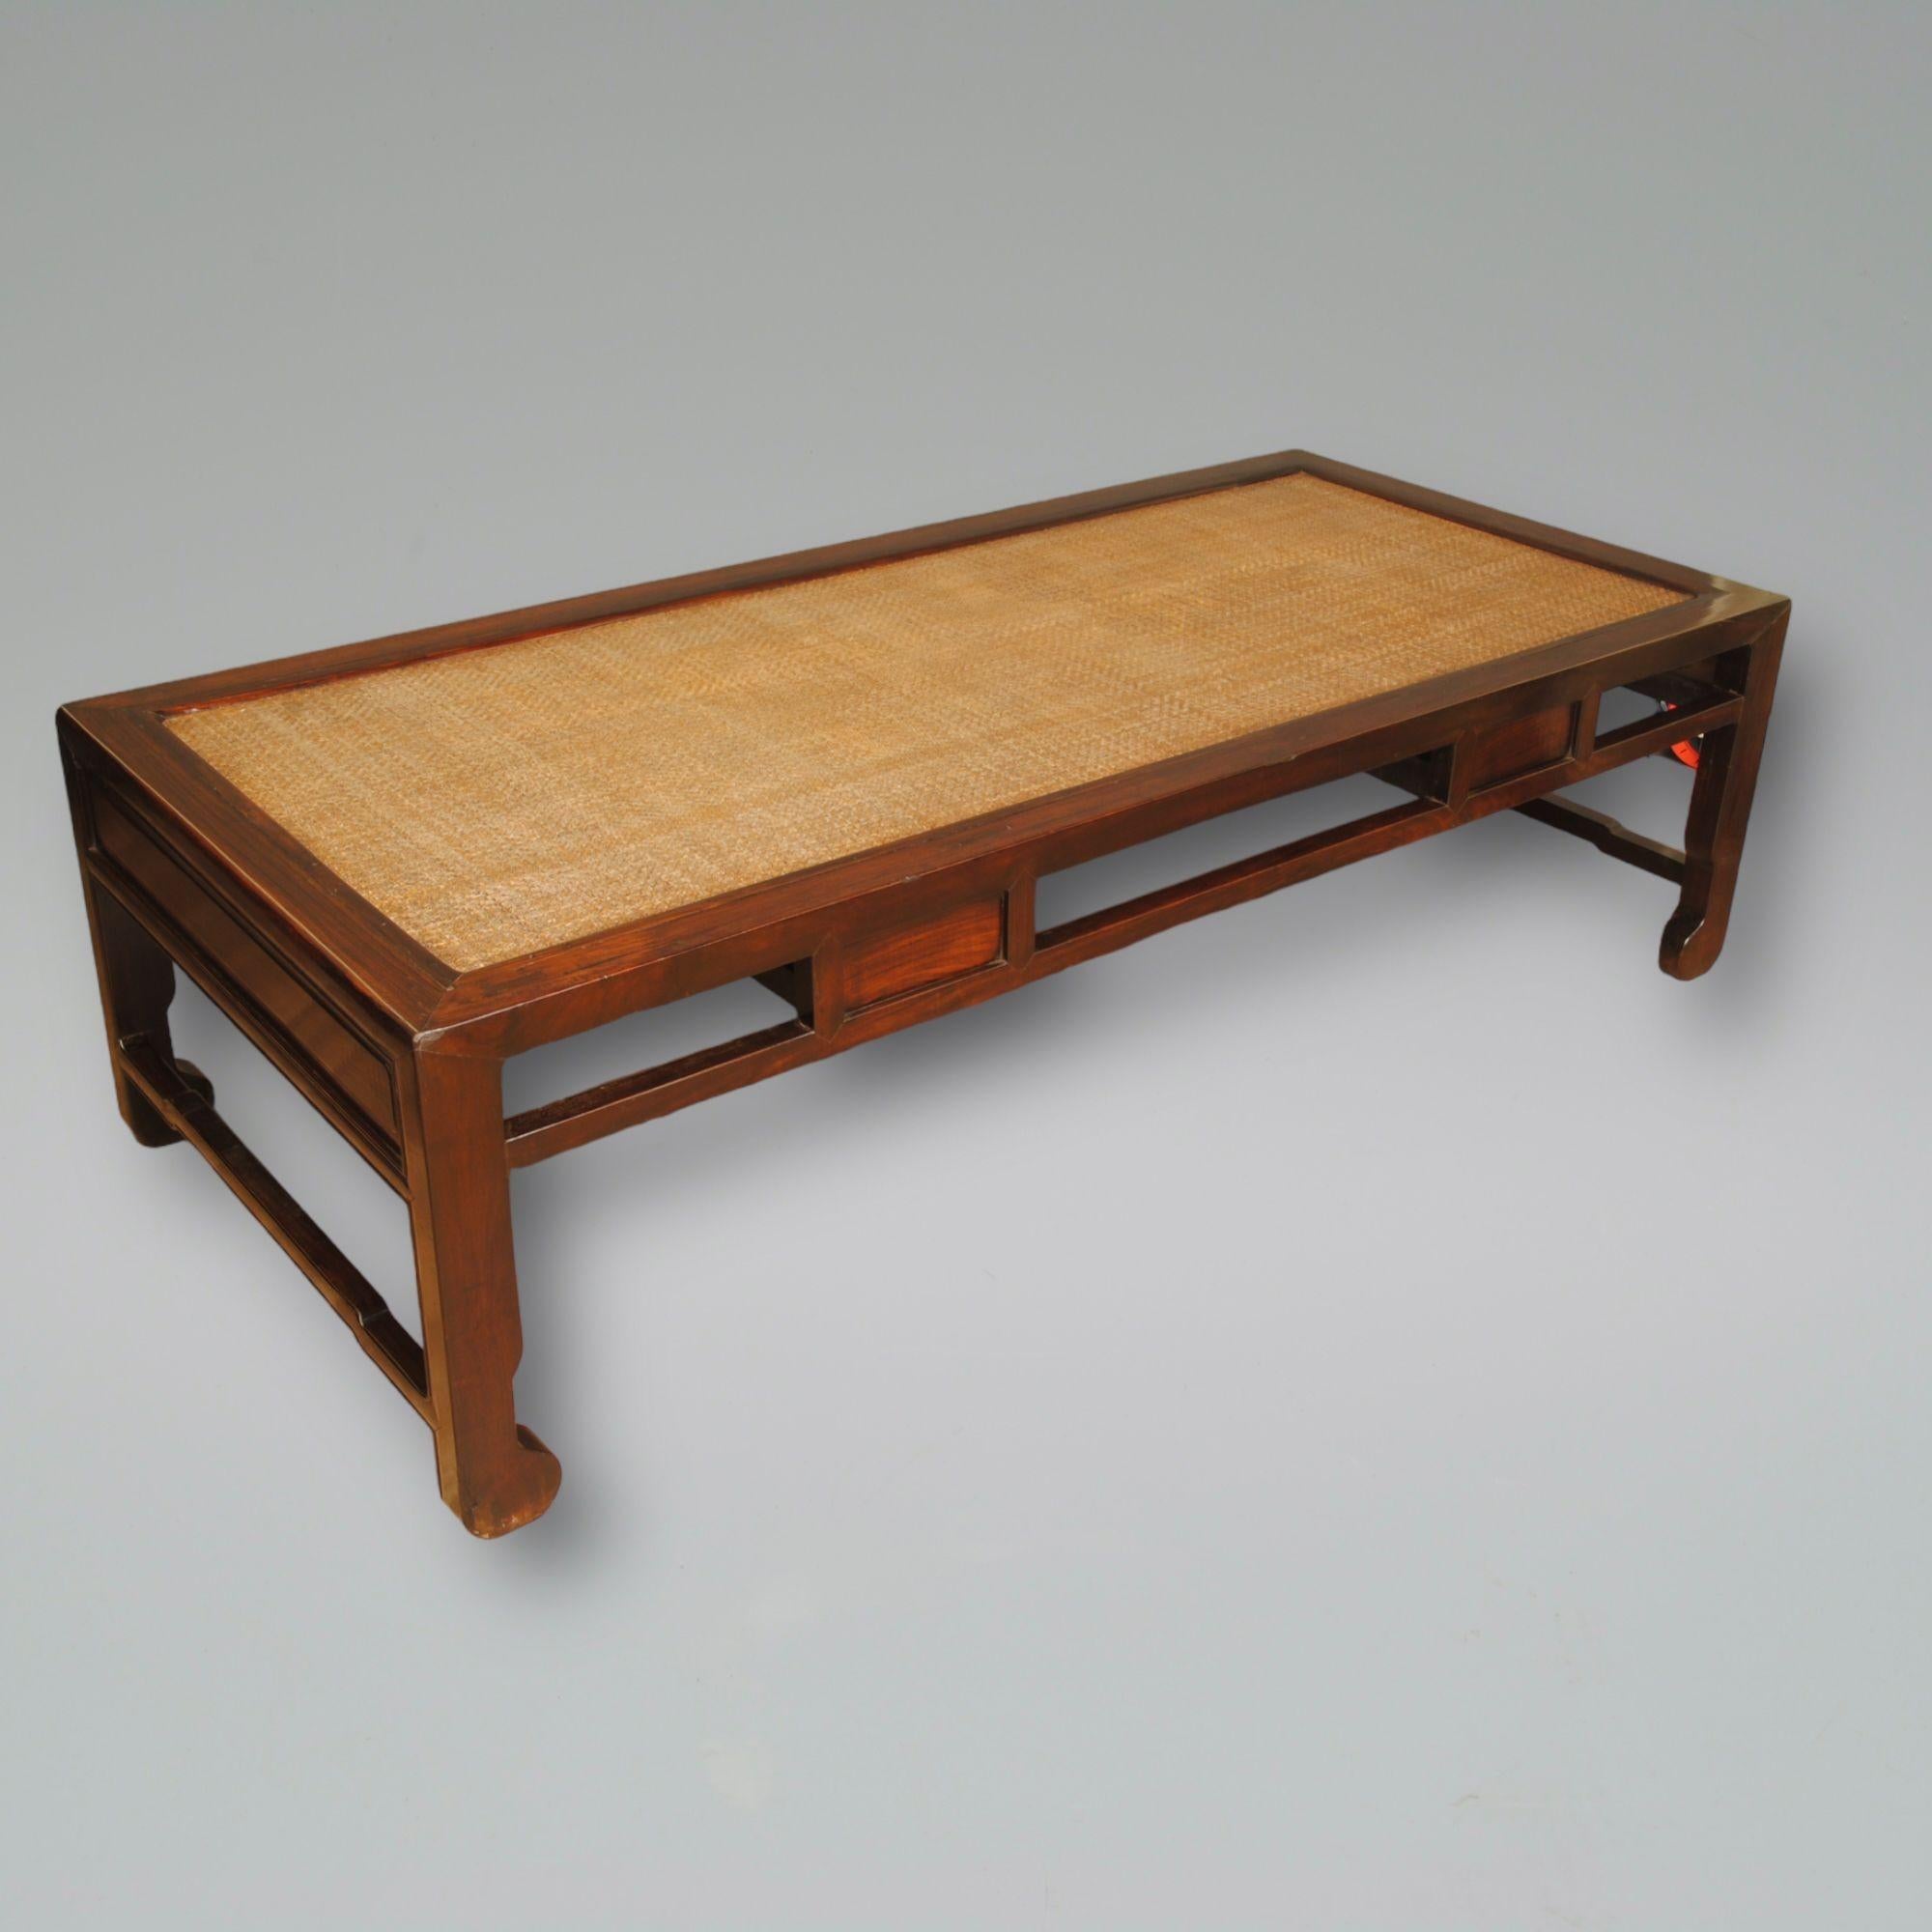 19th Century Chinese Hardwood Table Or Daybed For Sale